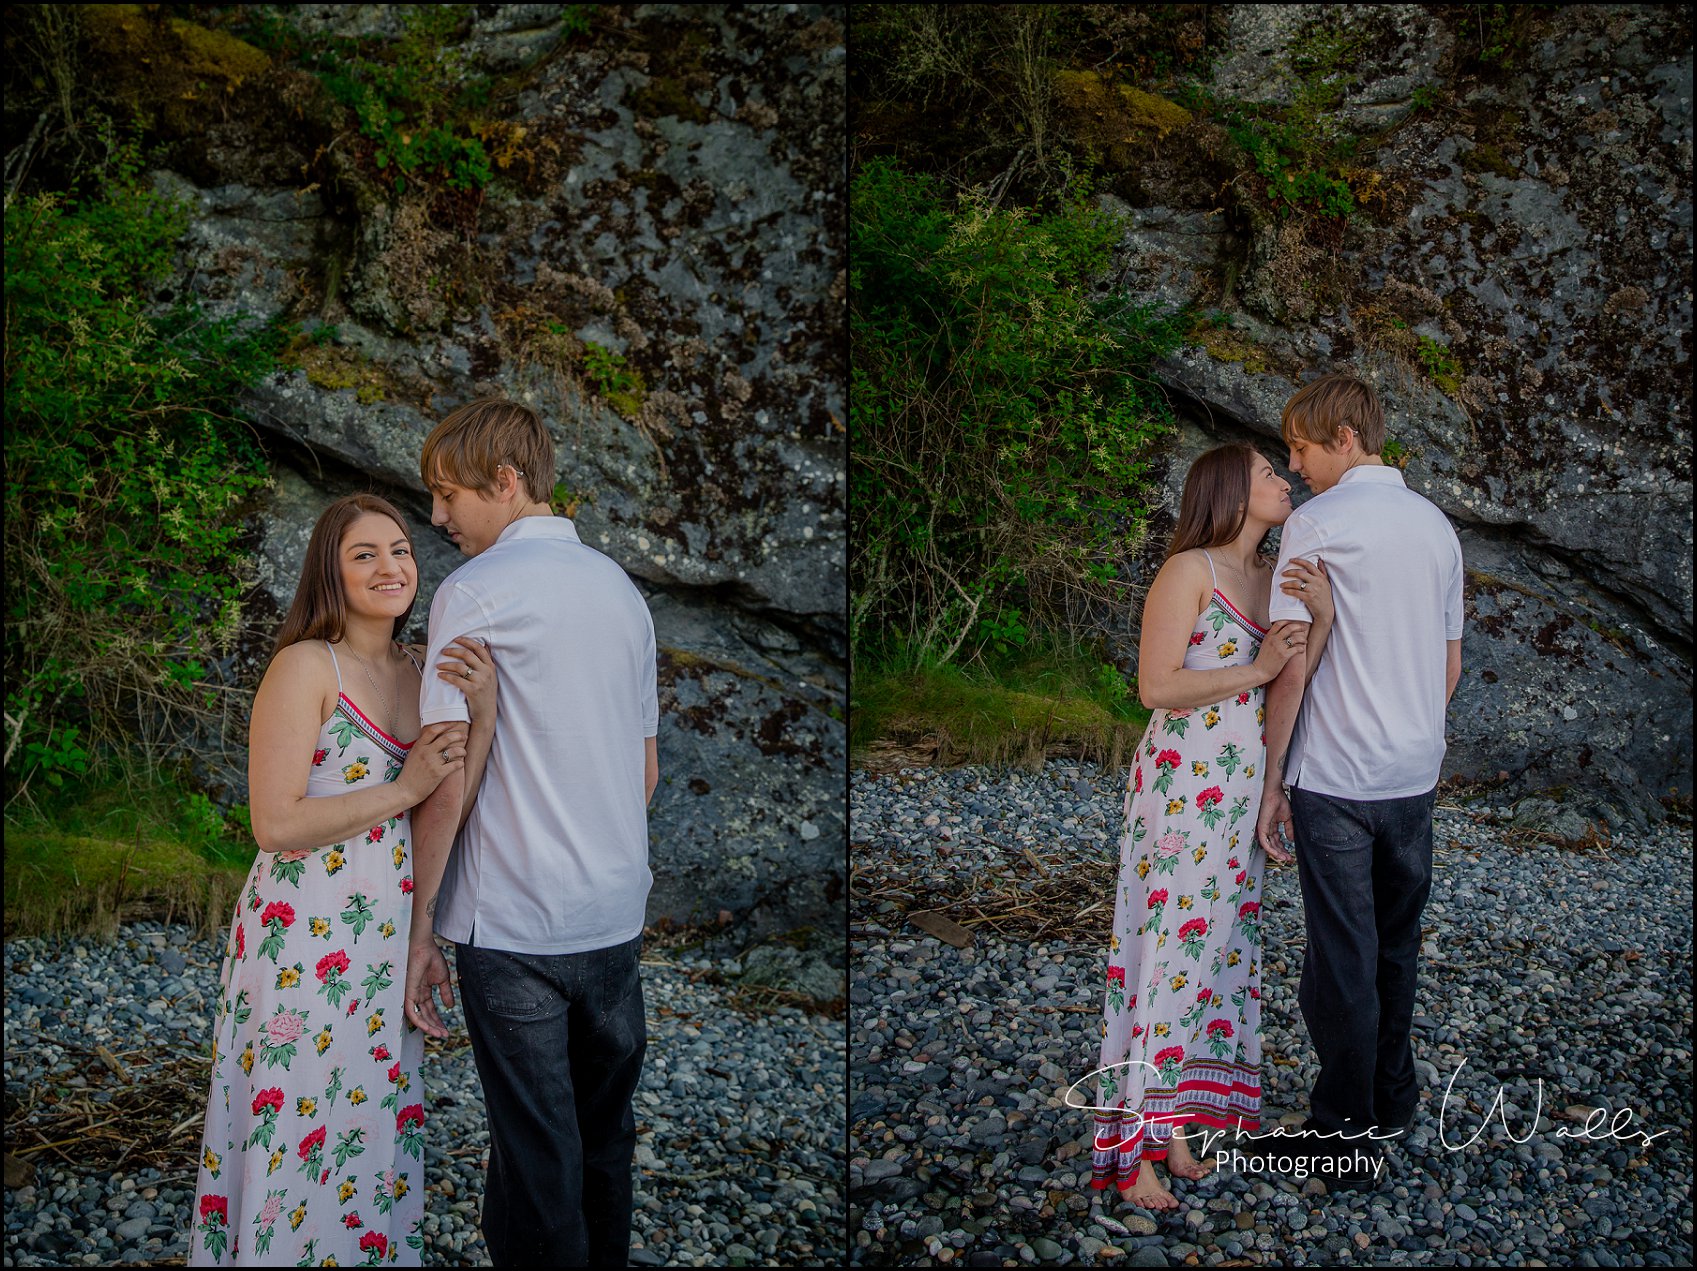 Nataly Marty047 IN A GALAXY FAR FAR AWAY | NATALY & MARTY | DECEPTION PASS ENGAGEMENT SESSION